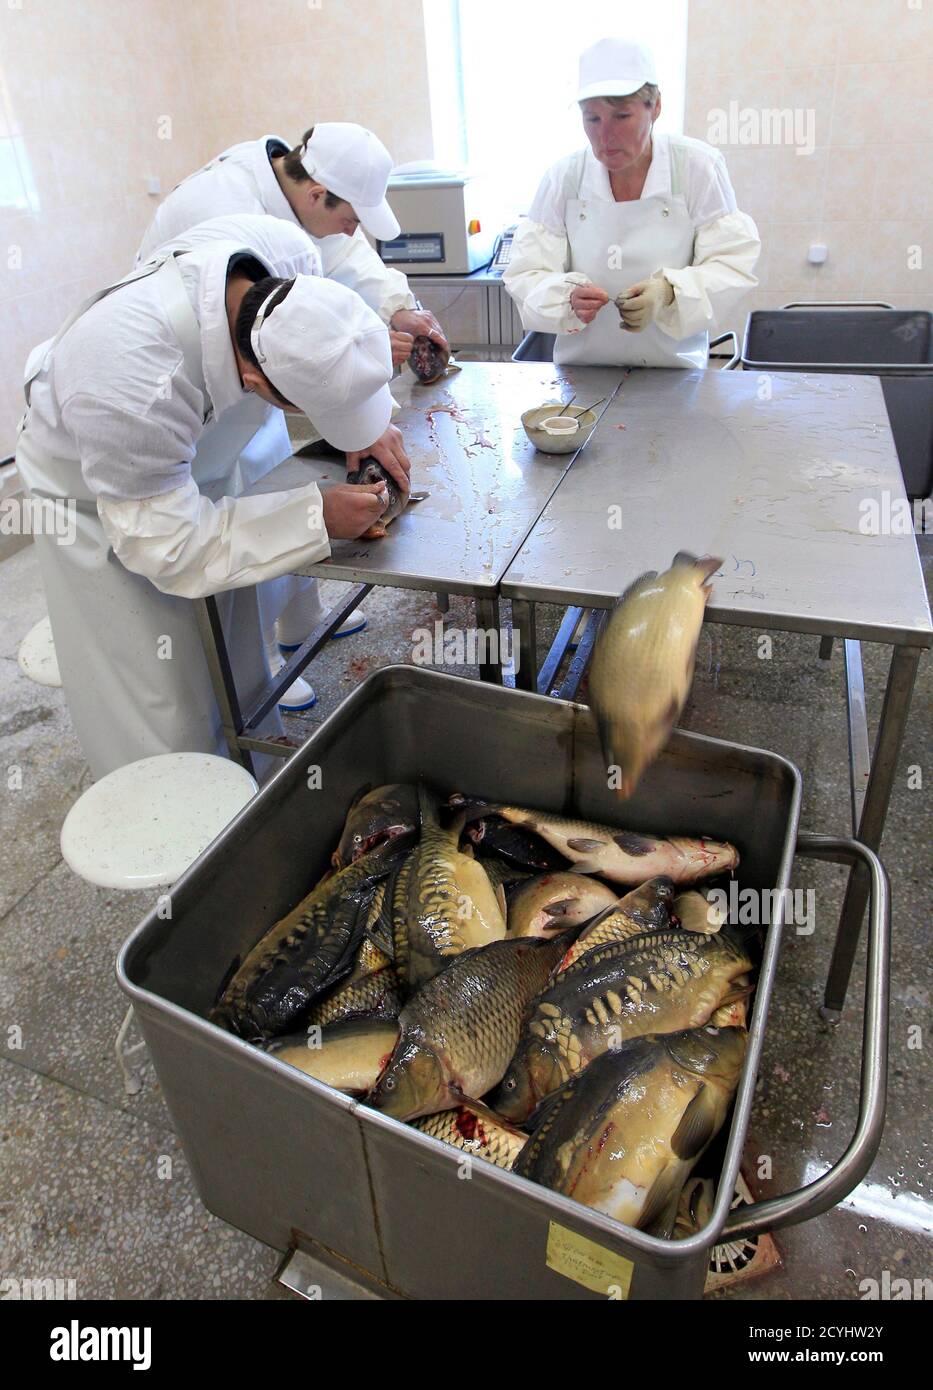 Employees remove hypophysis glands from carps at a state fish farm in the village of Aziorny, some 50 km (31 miles) east of Minsk, March 16, 2011. The gland is used to stimulate the excretion of a hormone, which when injected into other carps speeds up spawning independent of weather conditions.  REUTERS/Vasily Fedosenko  (BELARUS - Tags: ANIMALS ENVIRONMENT SOCIETY) Stock Photo